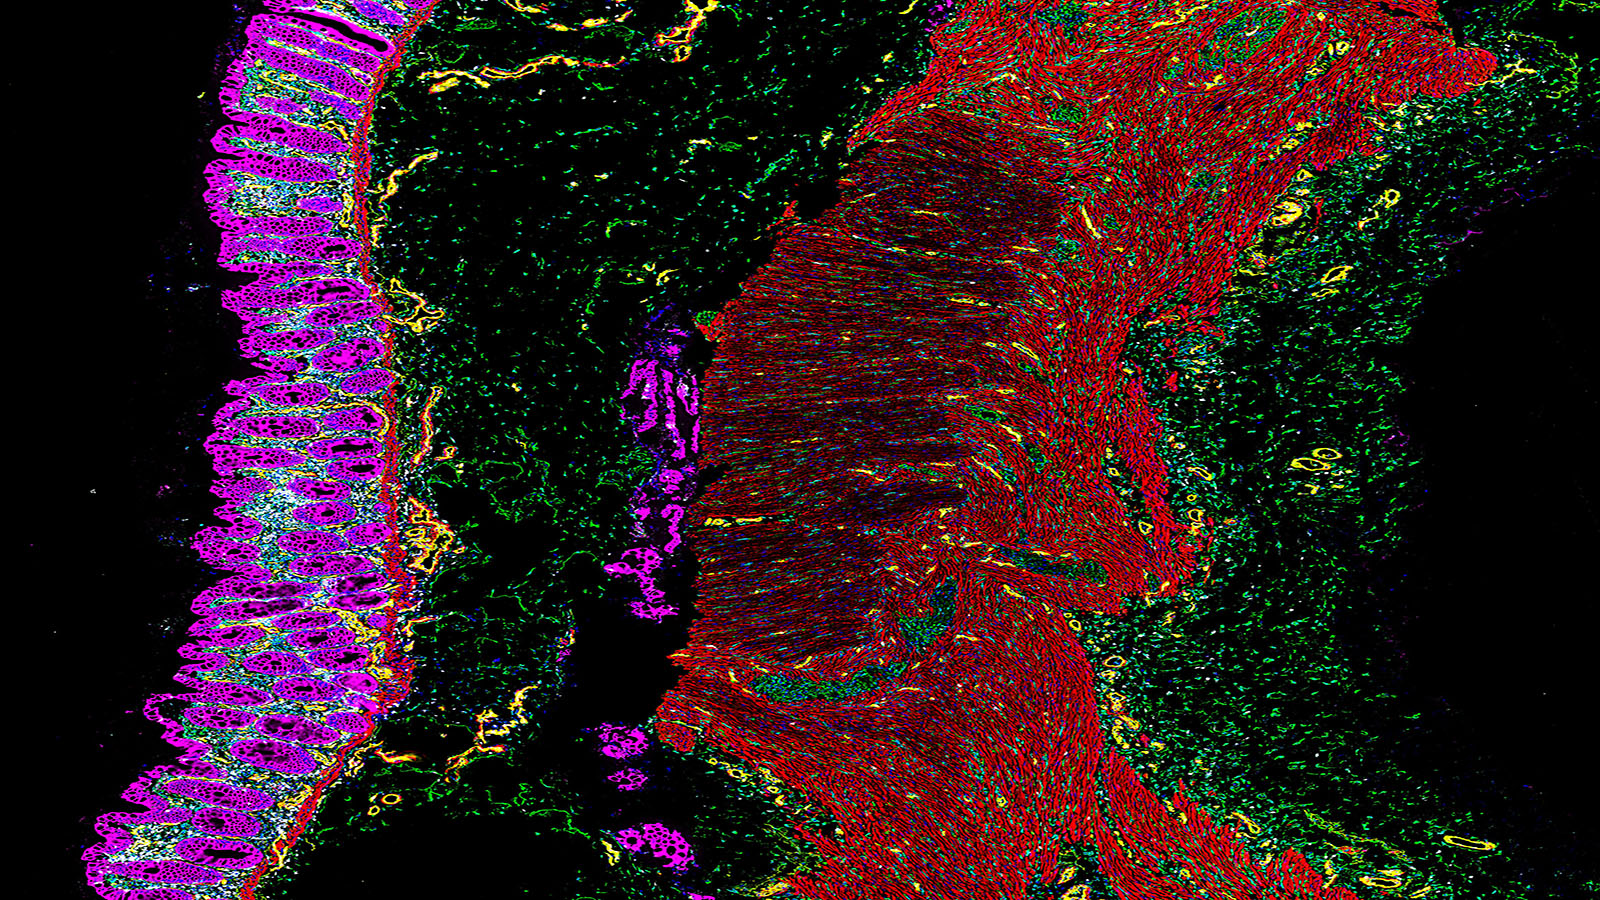 CODEX image of healthy human colon, from Dr. John Hickey of the Nolan Lab at Stanford